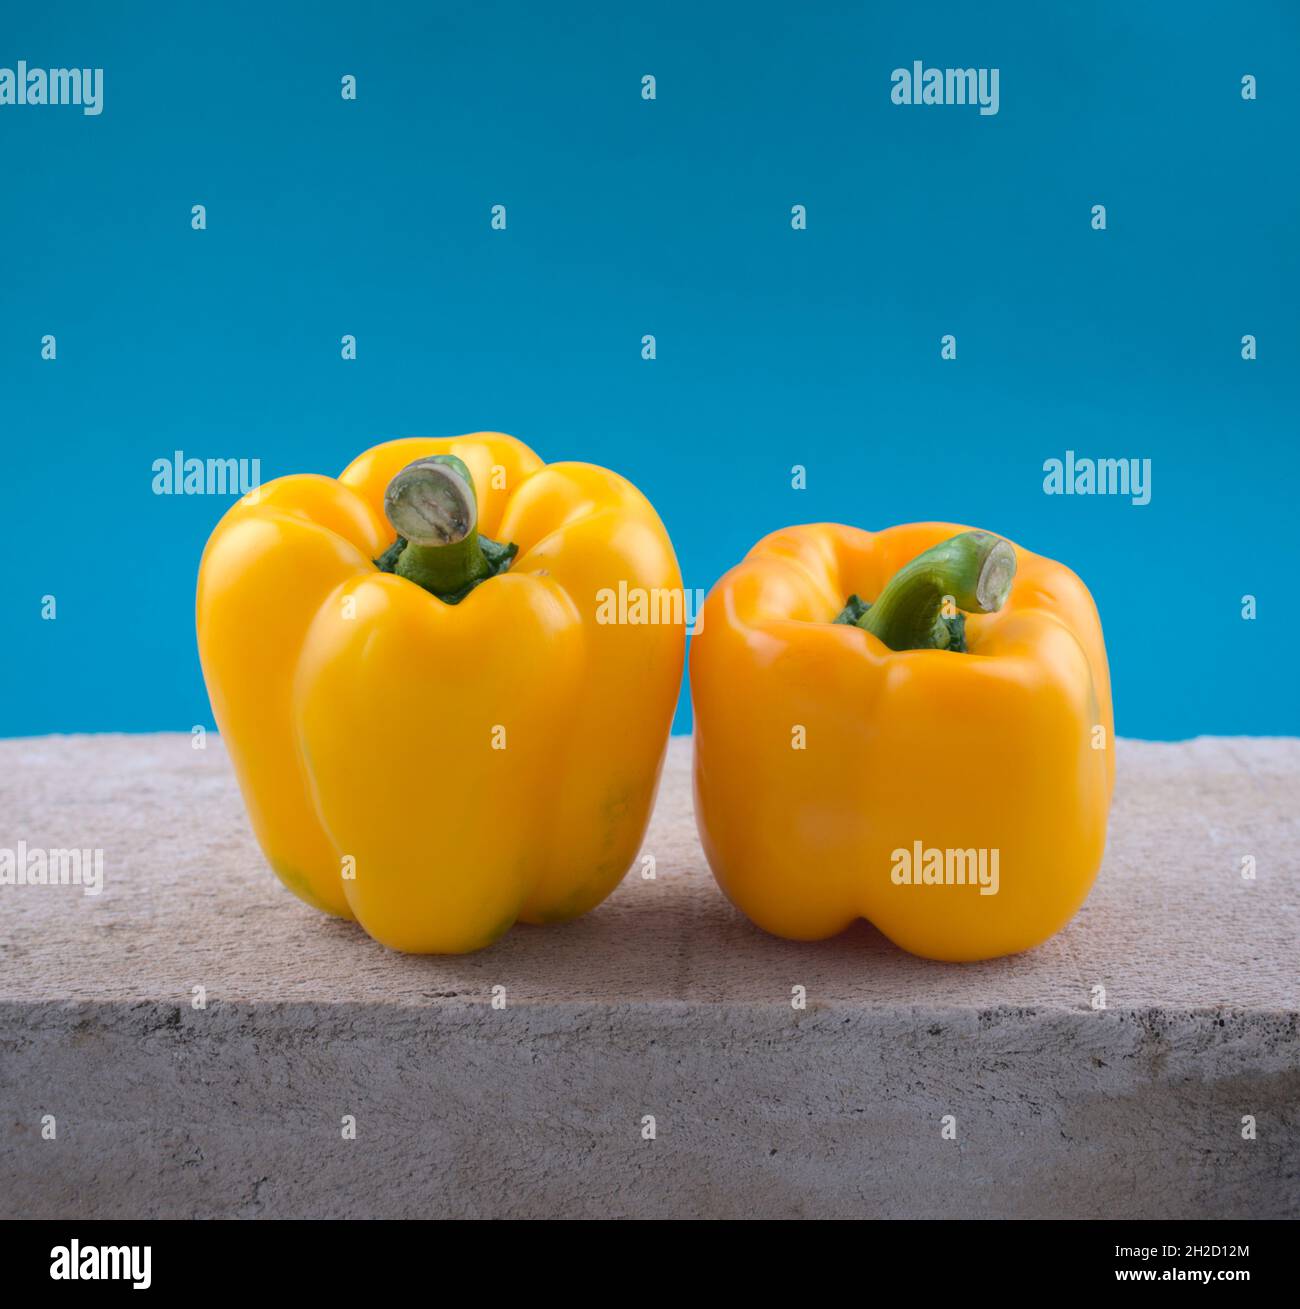 Fresh organic yellow bell peppers veggie on grunge cement texture slate against blue abstract background. Food, still life, wall art image style. Stock Photo